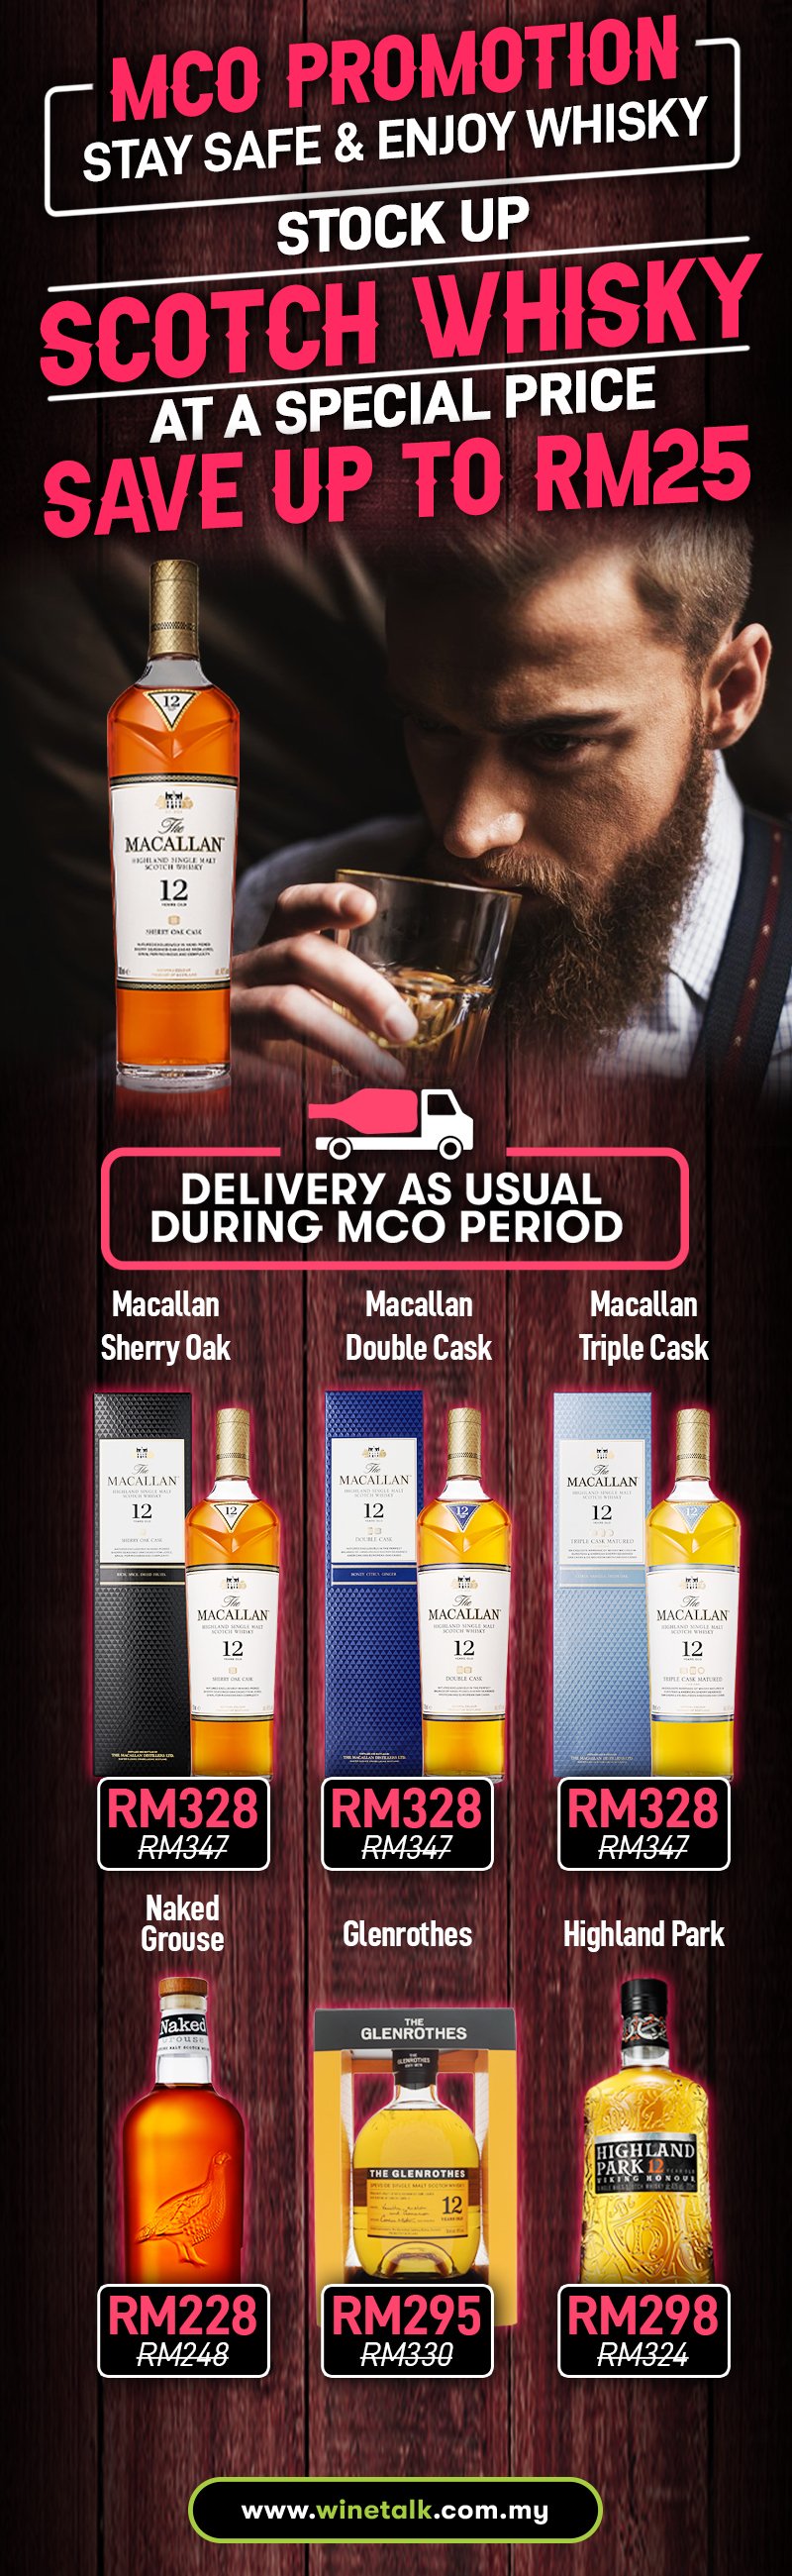 Wine Talk Peninsular Malaysia Save Up To Rm25 With Mco Promotion Scotch Whisky At Special A Price Milled